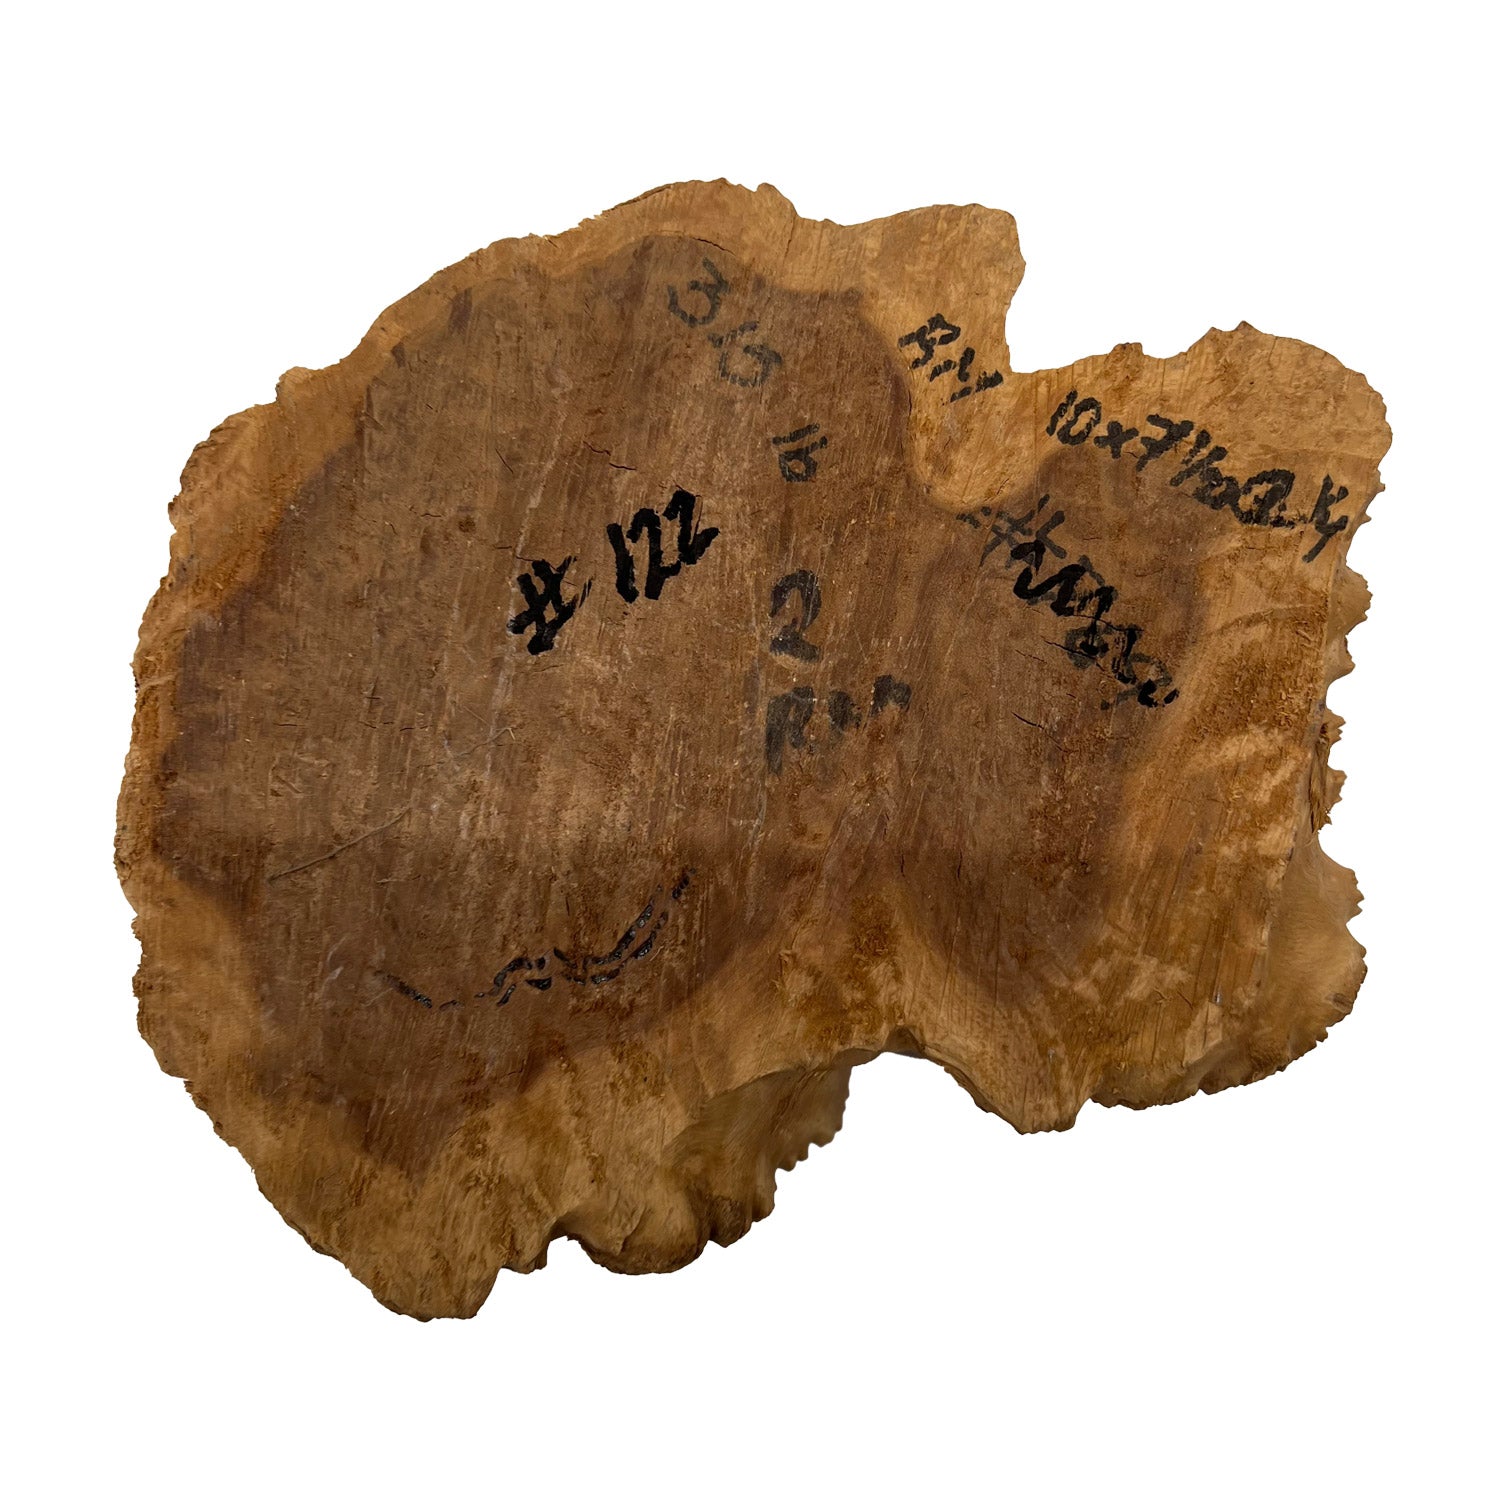 Red Mallee Burl | 10&quot; x 7-1/2&quot; x 2-1/4&quot; | 3.5 lbs - 